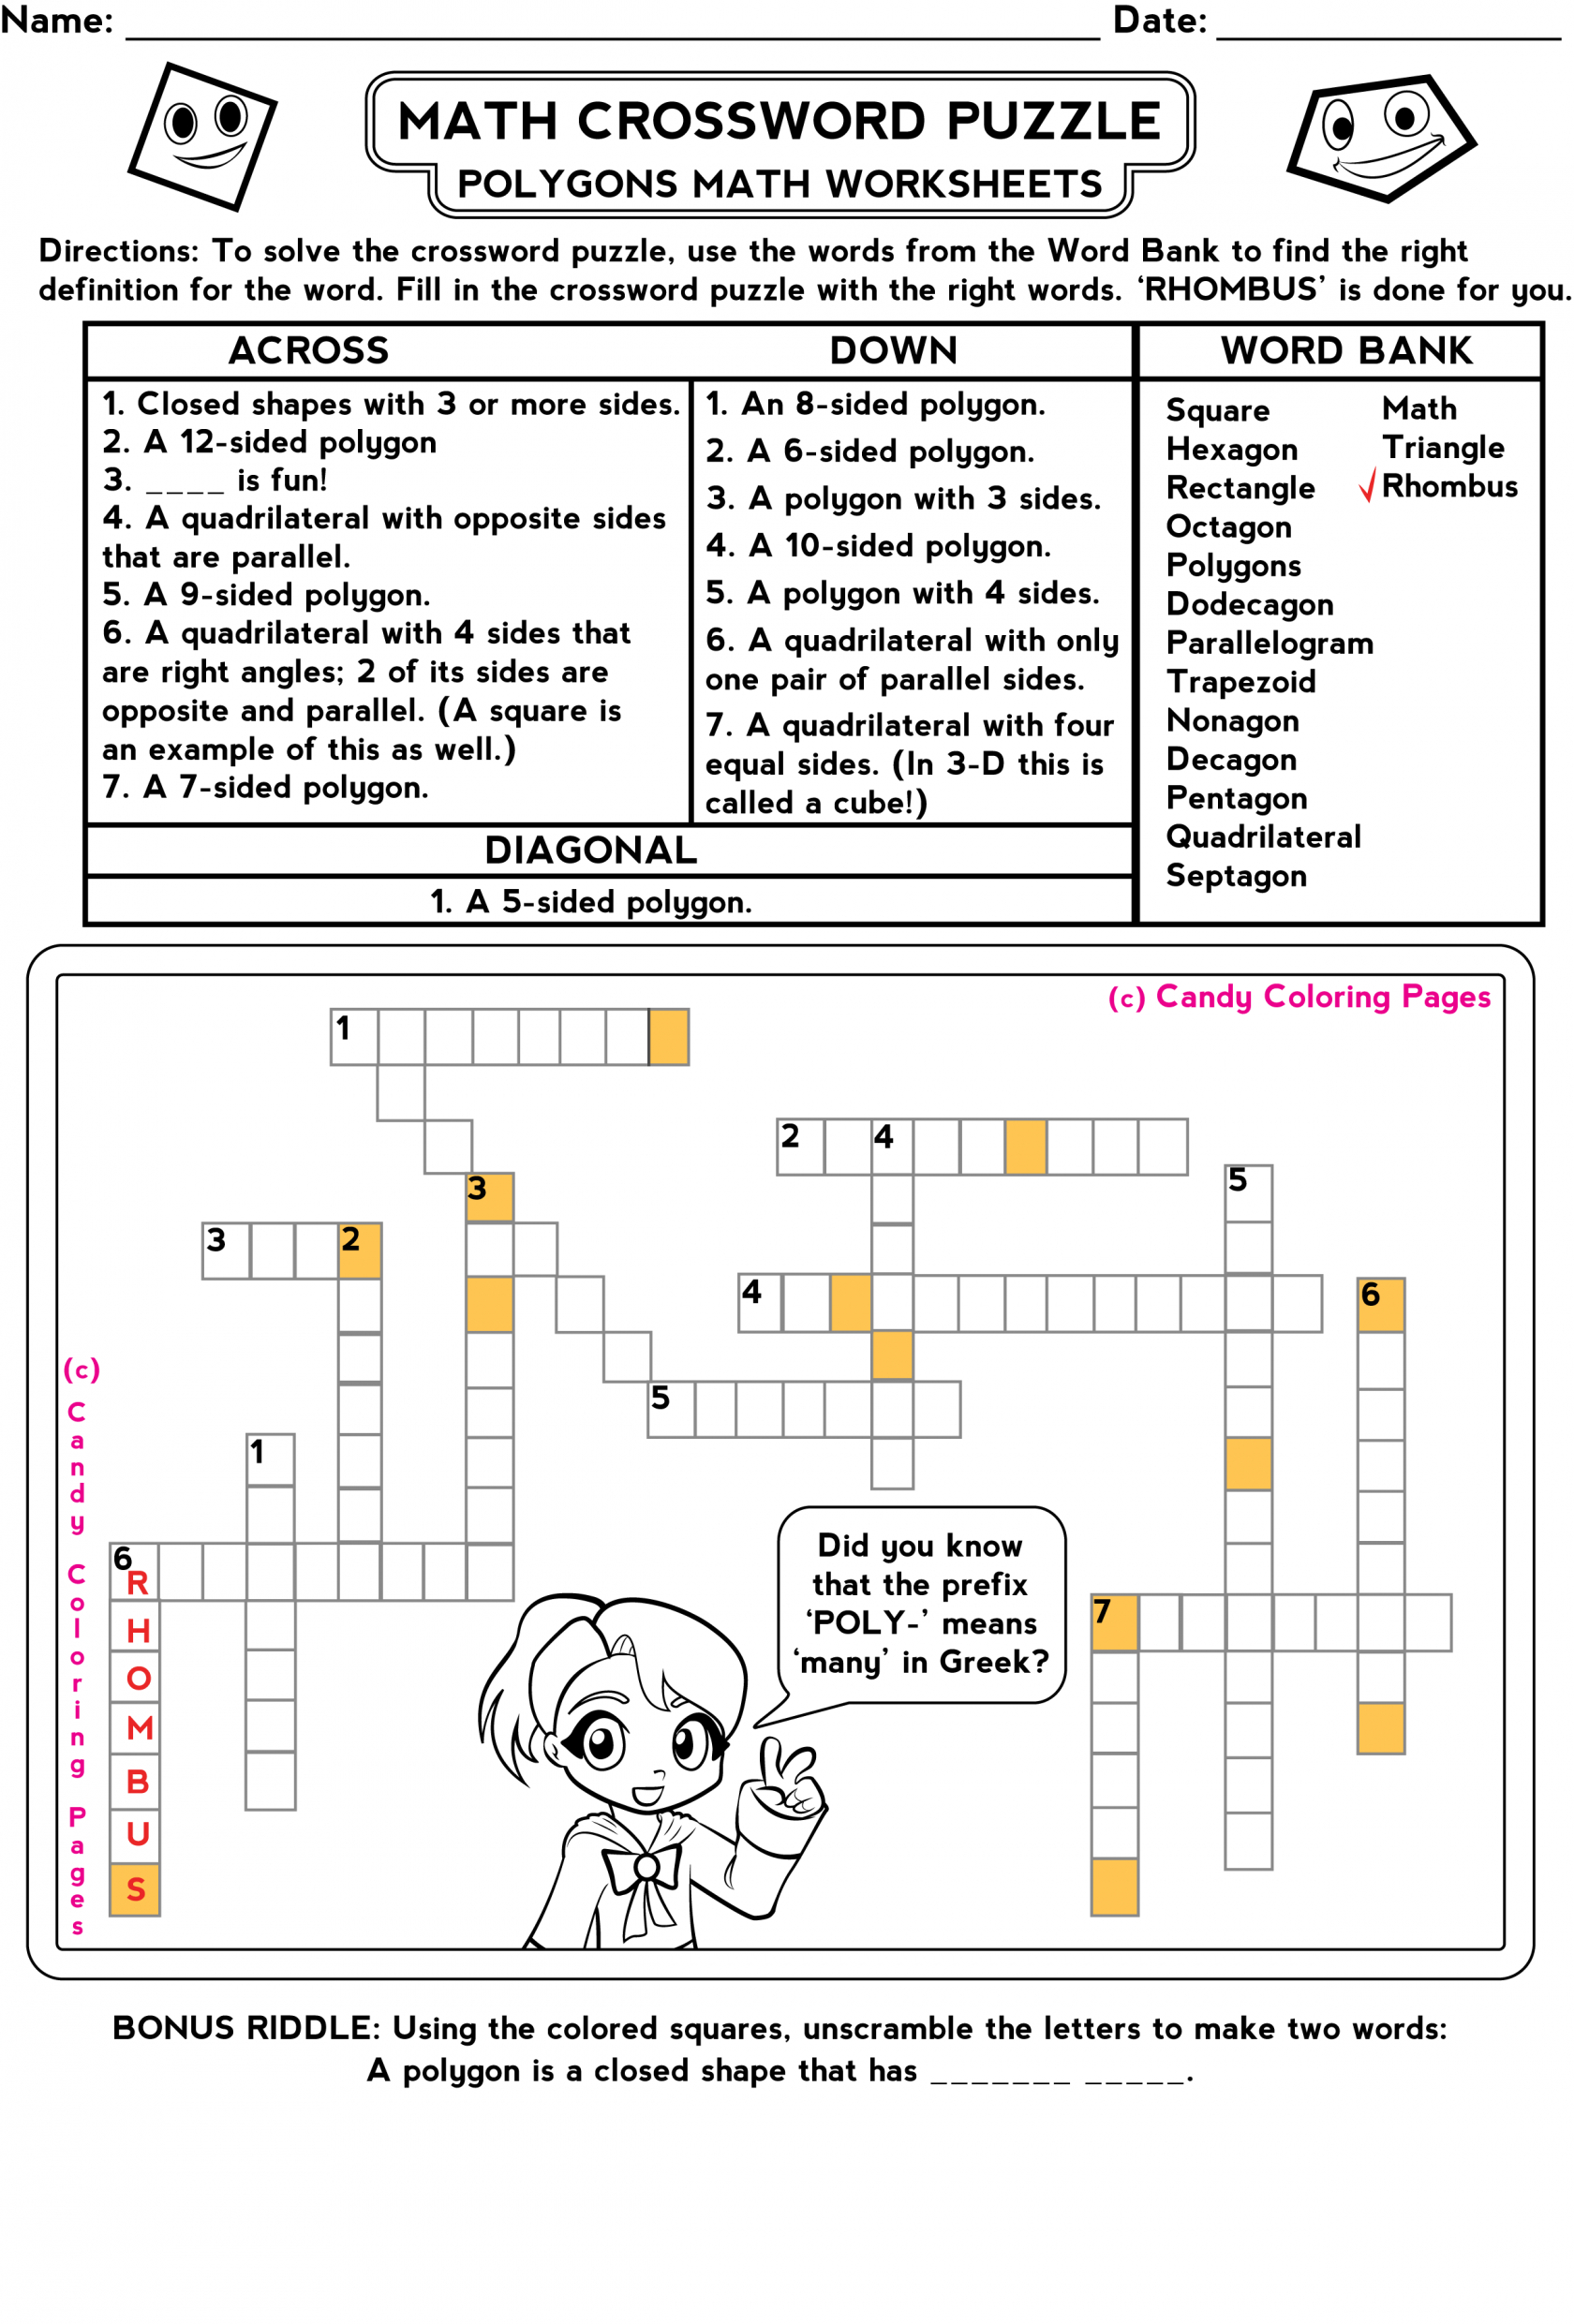 60 Explore Math Worksheets For 6Th Graders 52